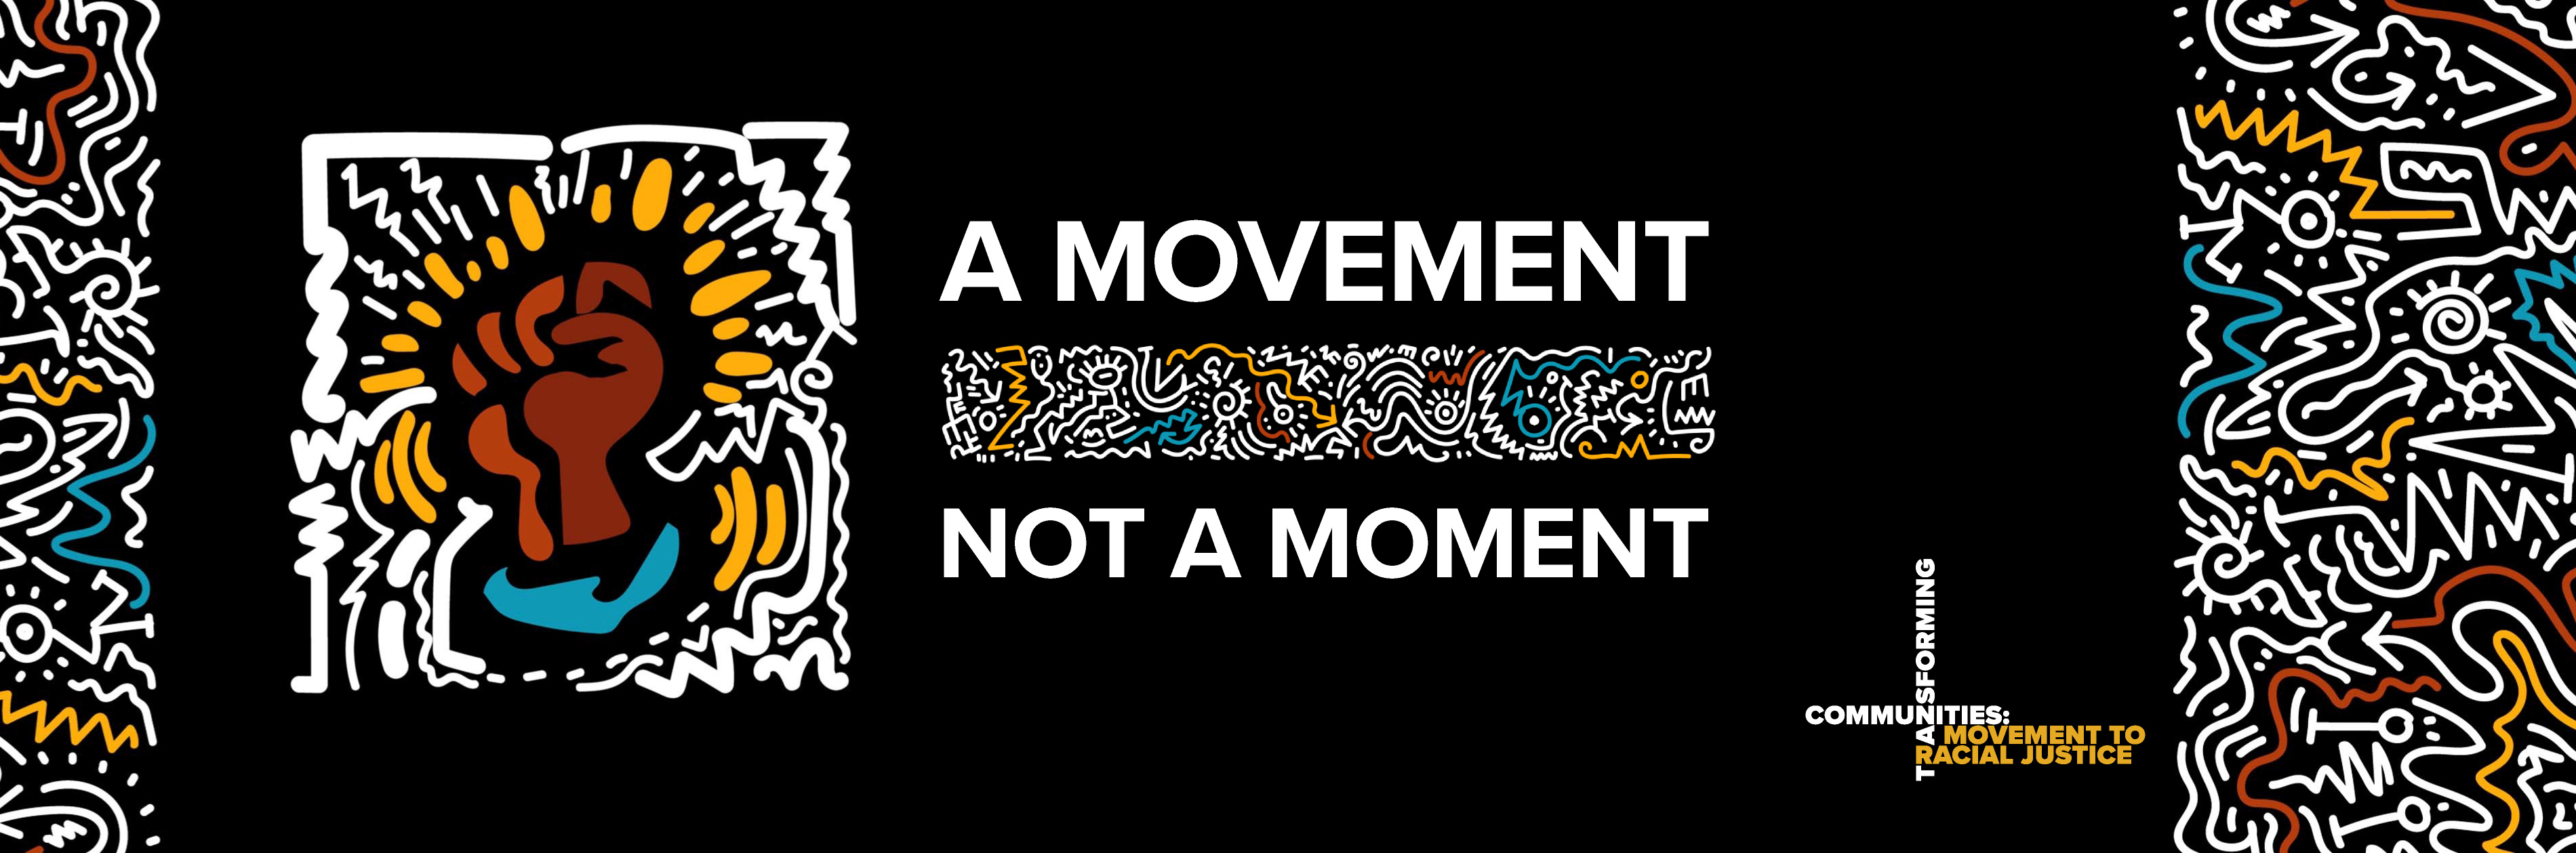 A power fist illustration with the words A Movement, Not a Moment.